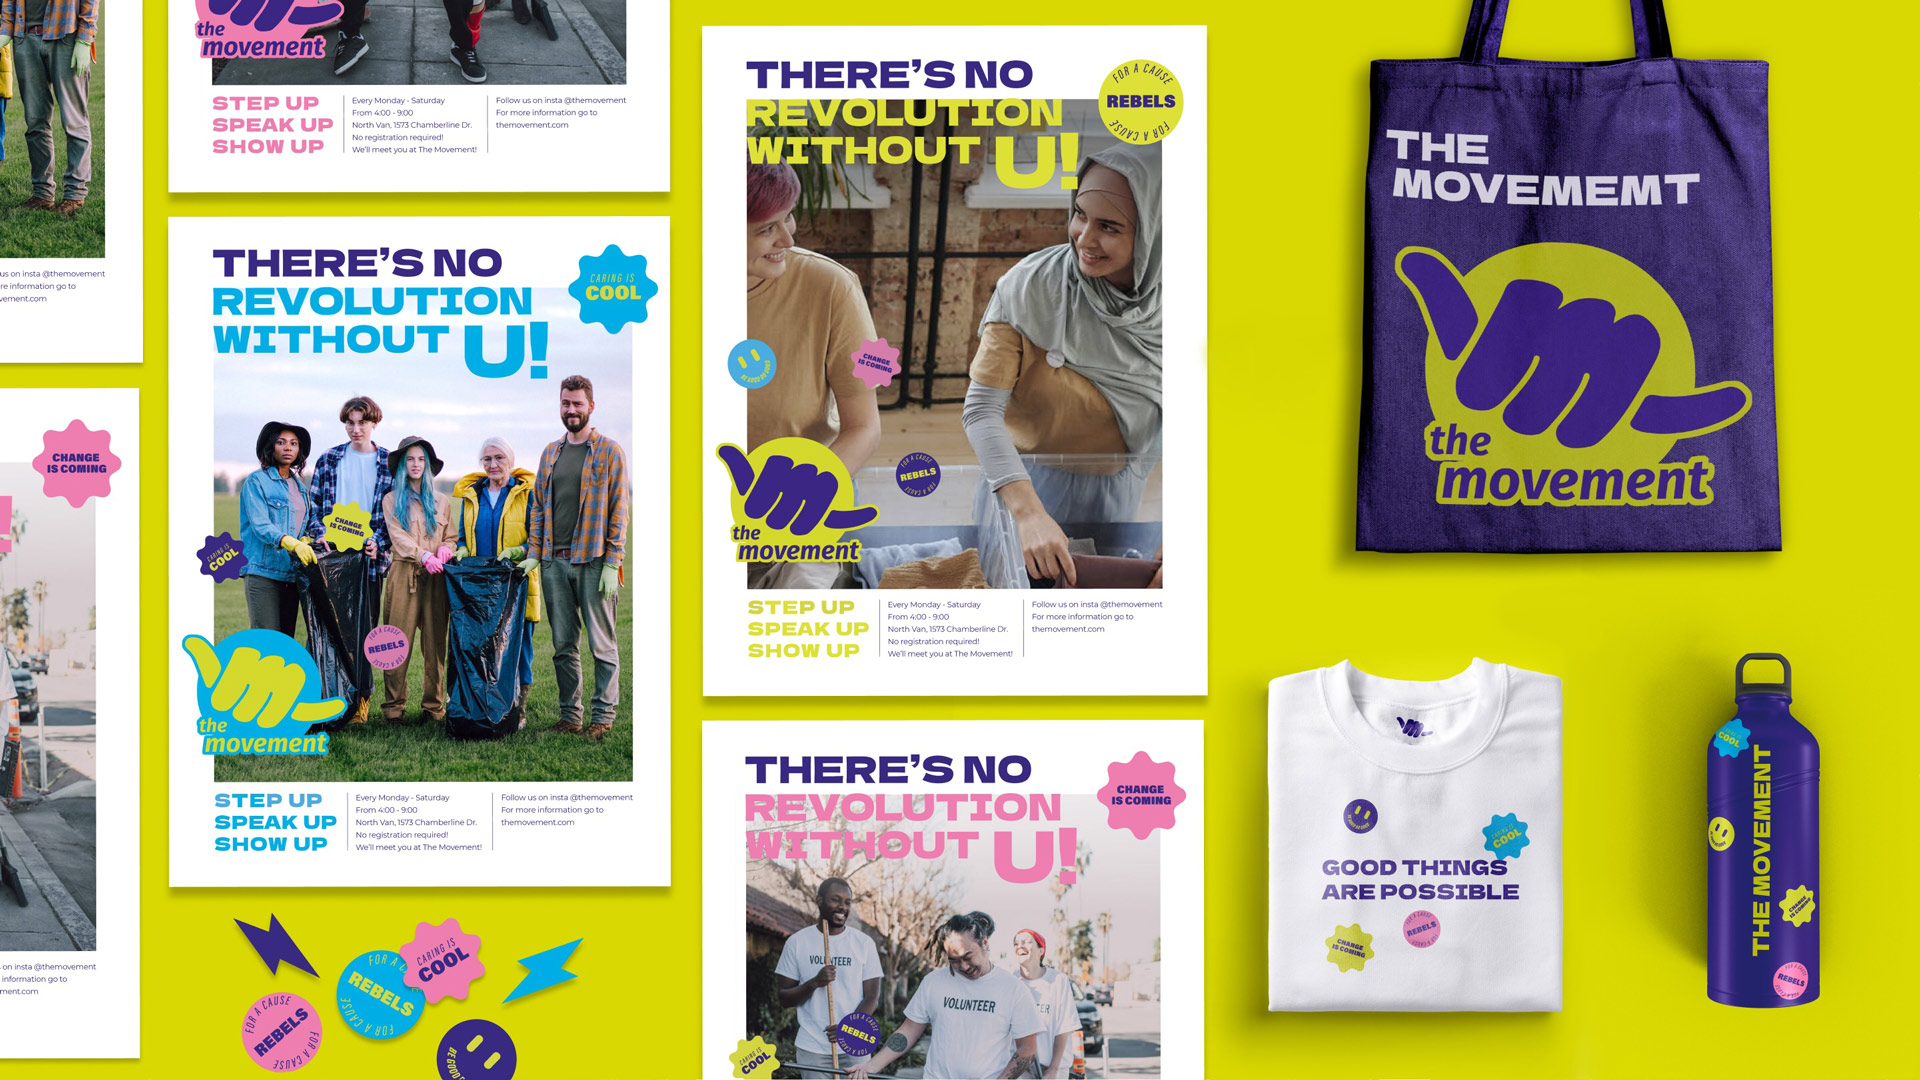 An image showing branded products for The Movement, a youth centre centred around social good and volunteering. The image shows a variety of posters, a tote bag, t-shirt, water bottle and stickers against a bright yellow background. The posters have a white background and all show different images of young people volunteering and feature the headline “there is not revolution without U!” in bright pink, blue and yellow. The tote bag is dark purple and features the company logo, a hang loose sign with the m forming the hands knuckles surrounded by a yellow highlight. The T-shirt is white and reads Good Things are Possible in purple text. The shirt is also decorated with 3 colourful stickers. The water bottle is dark purple and has The Movement written vertically along the side and, like the t-shirt, is decorated with a variety of coloured stickers.